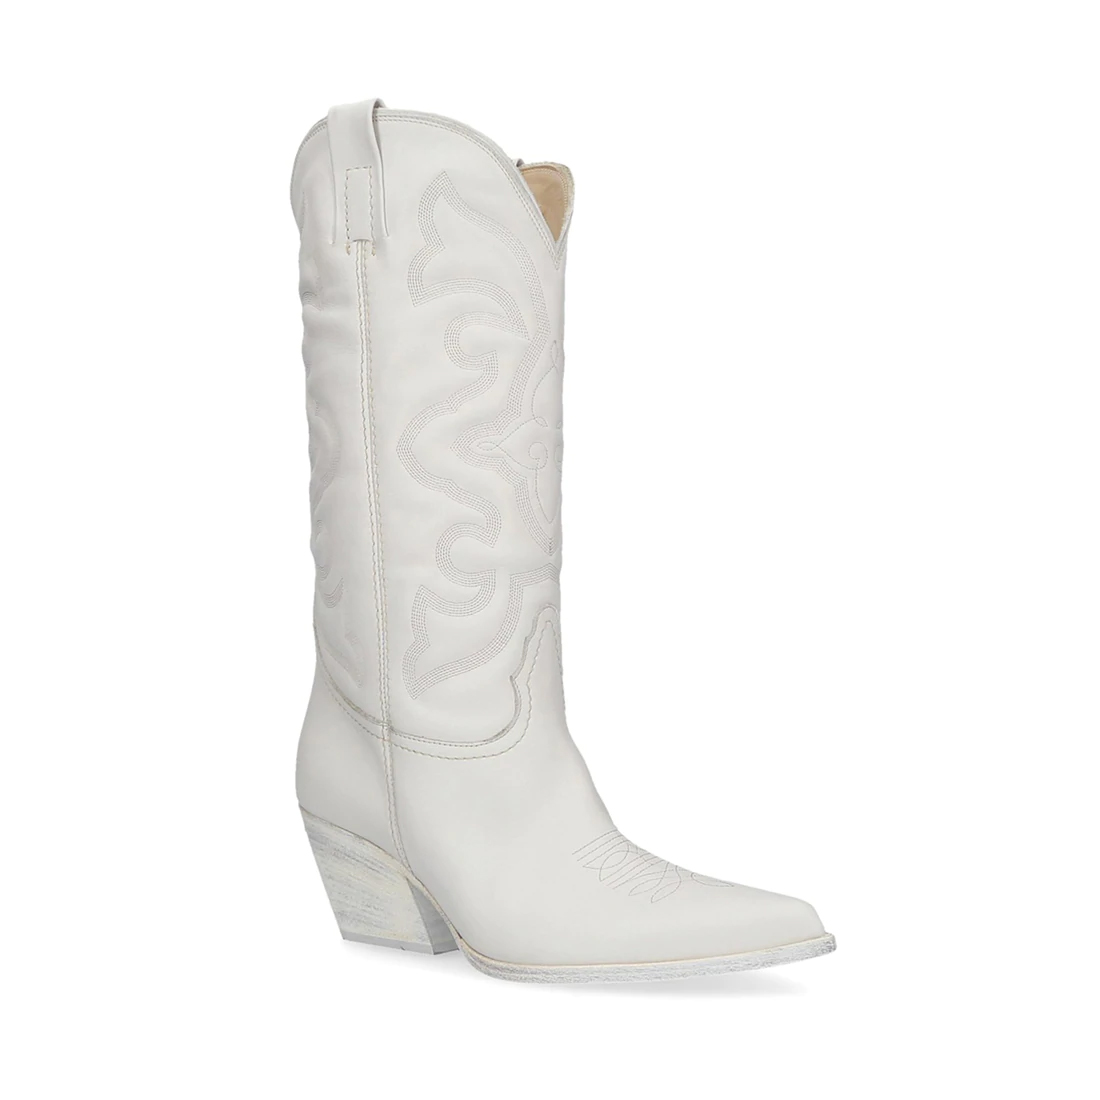 steve madden west cowboy boot in white leather 105401